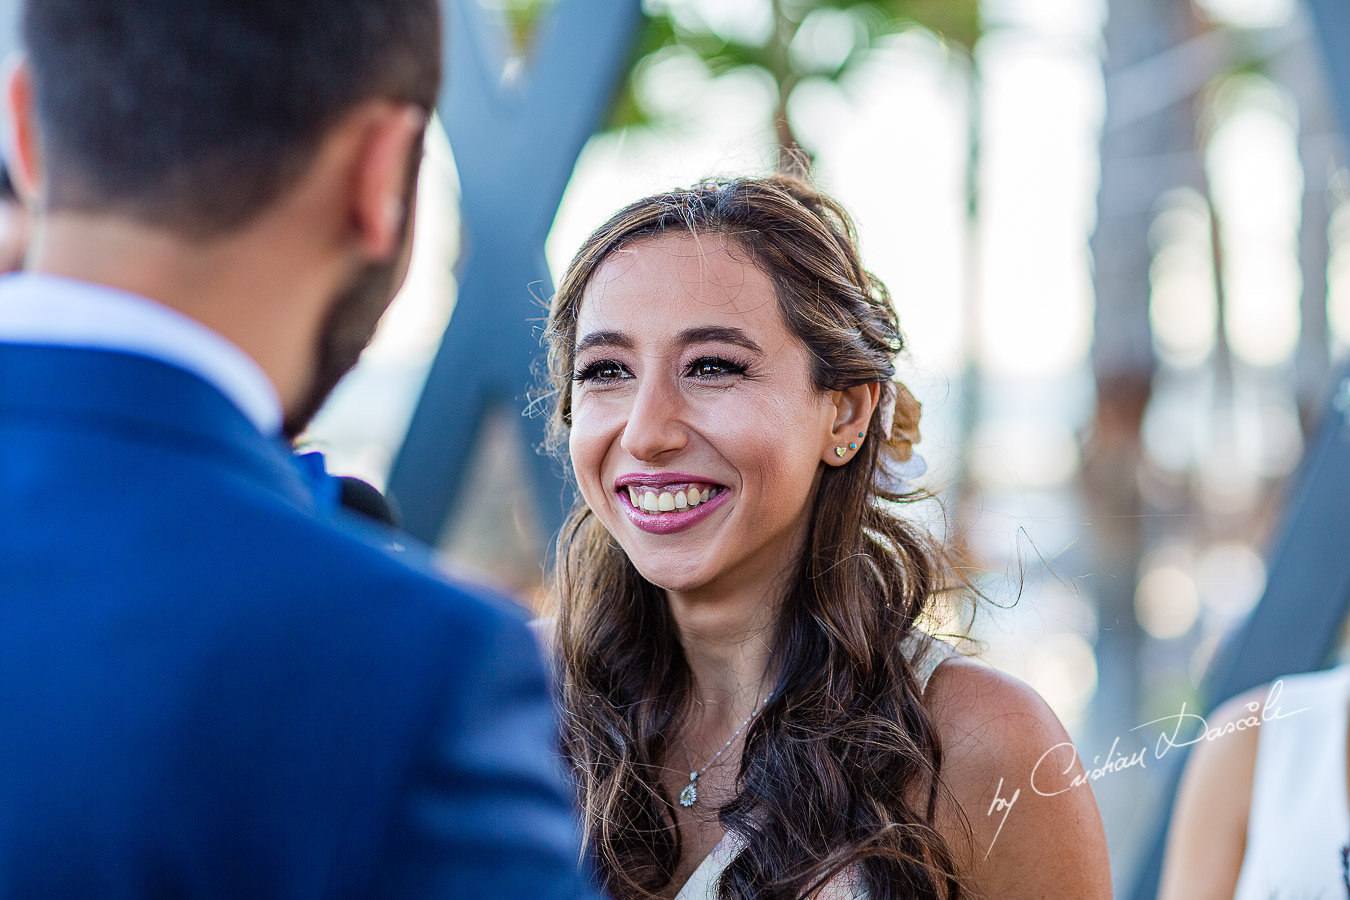 Genuine moments with the bride and groom during the ceremony, as part of an Exclusive Wedding photography at Grand Resort Limassol, captured by Cyprus Wedding Photographer Cristian Dascalu.